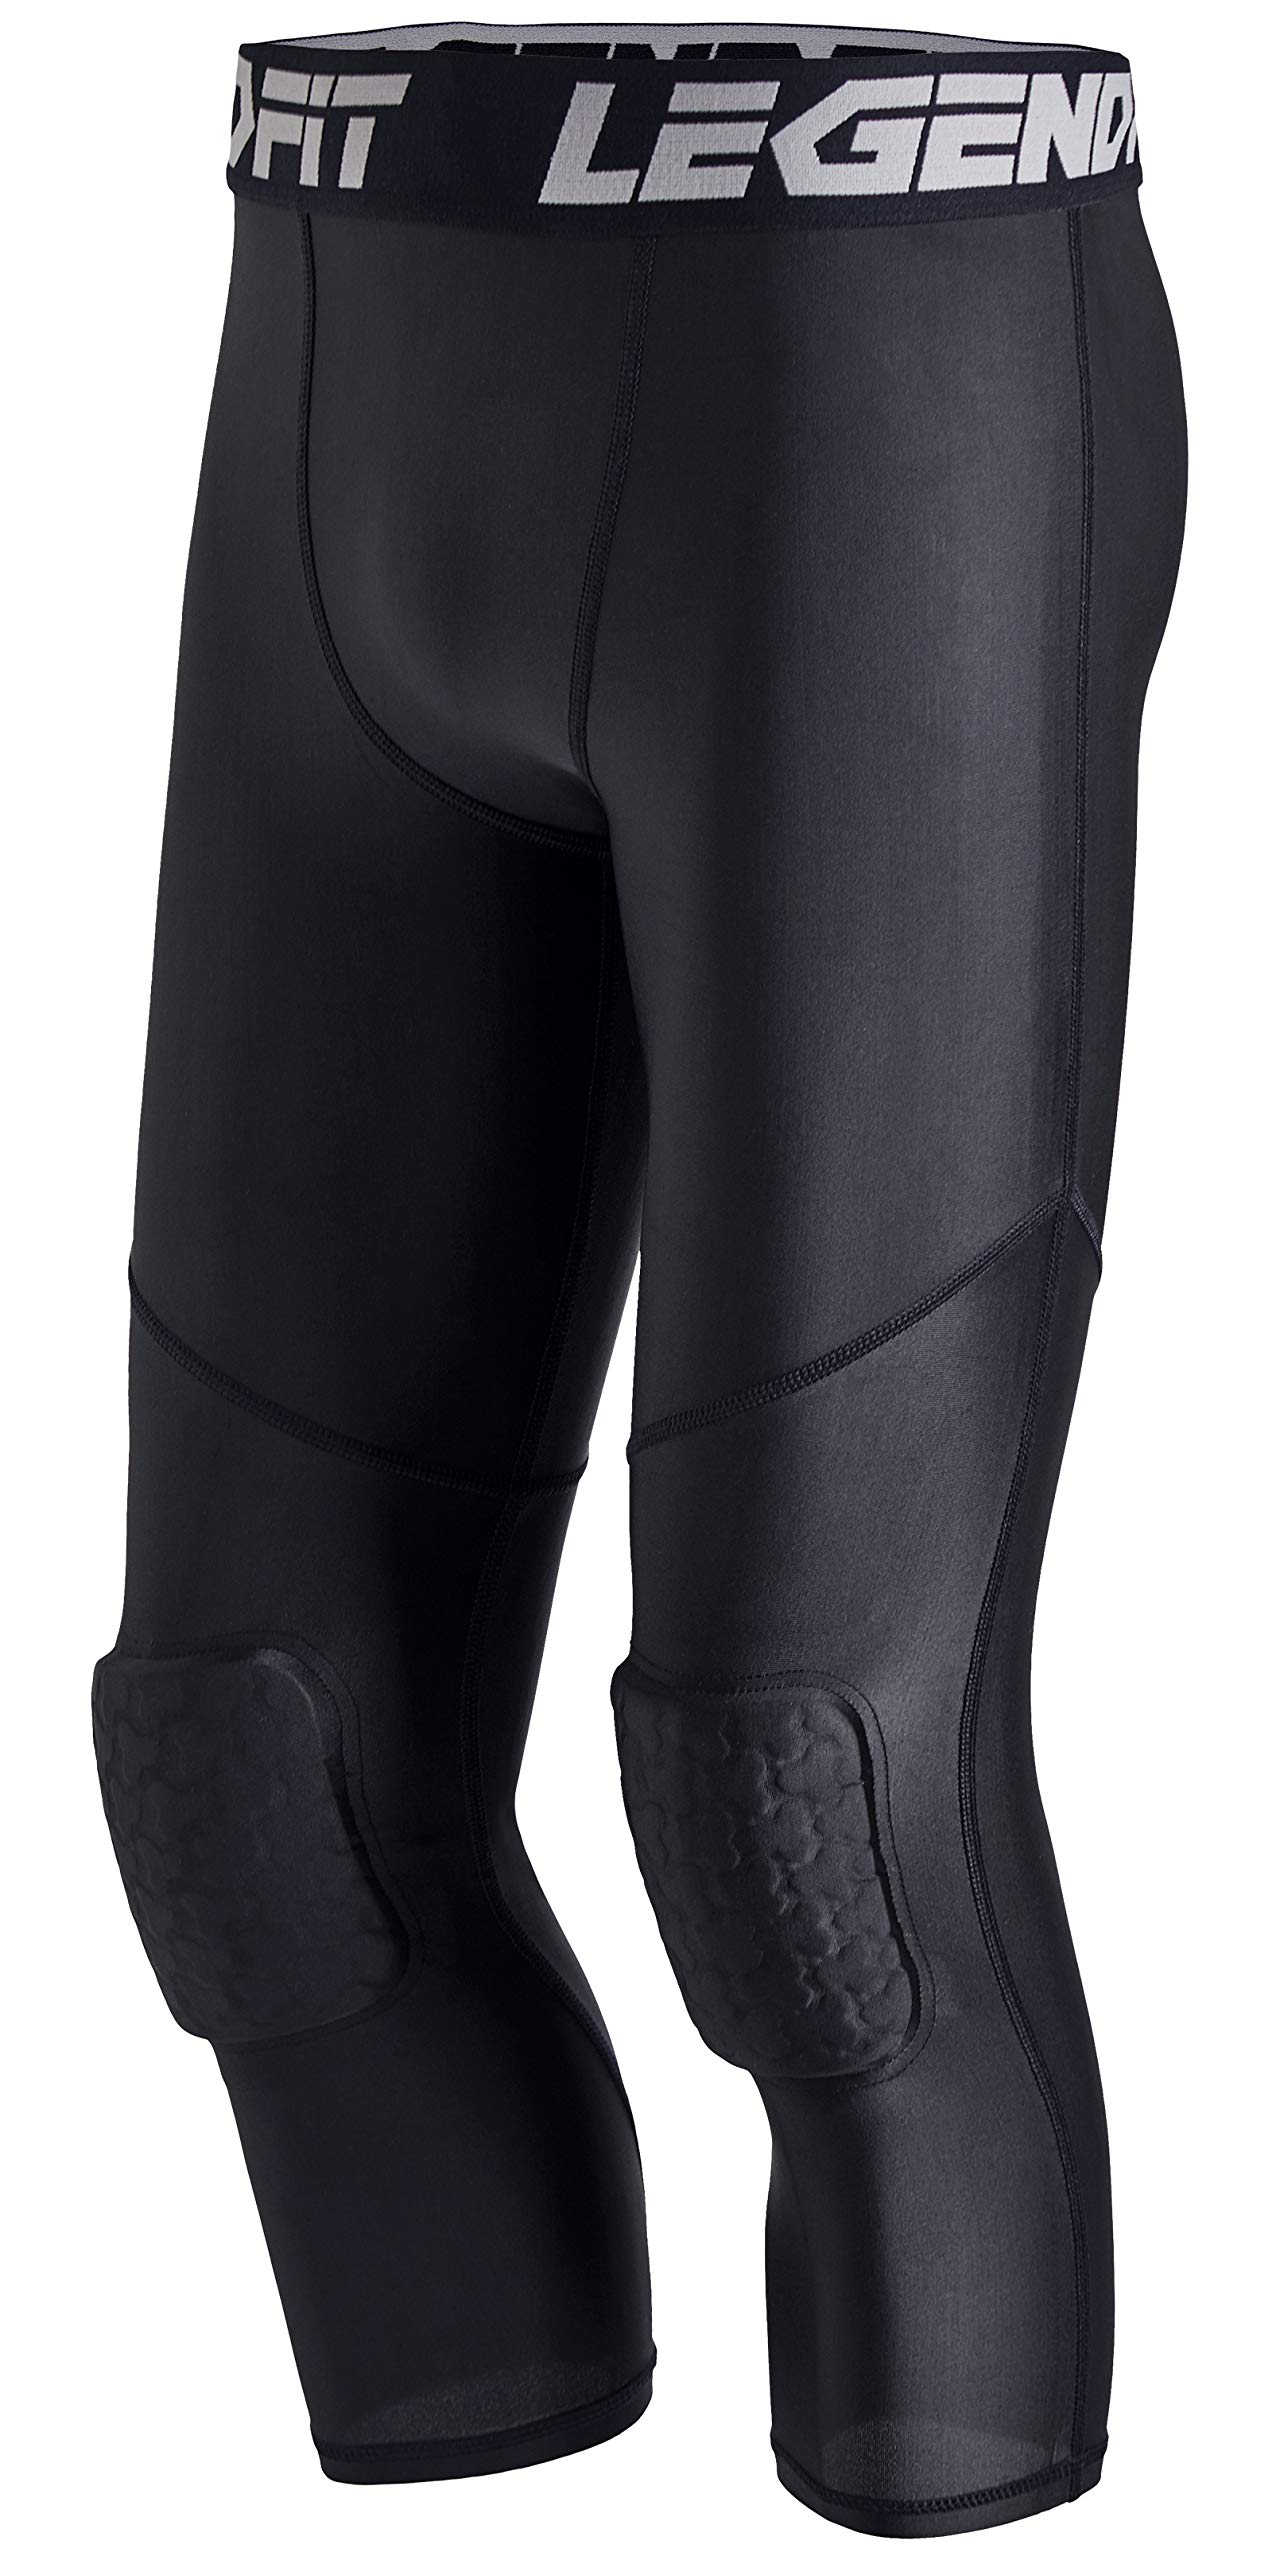 Basketball Pants with Knee Pads for